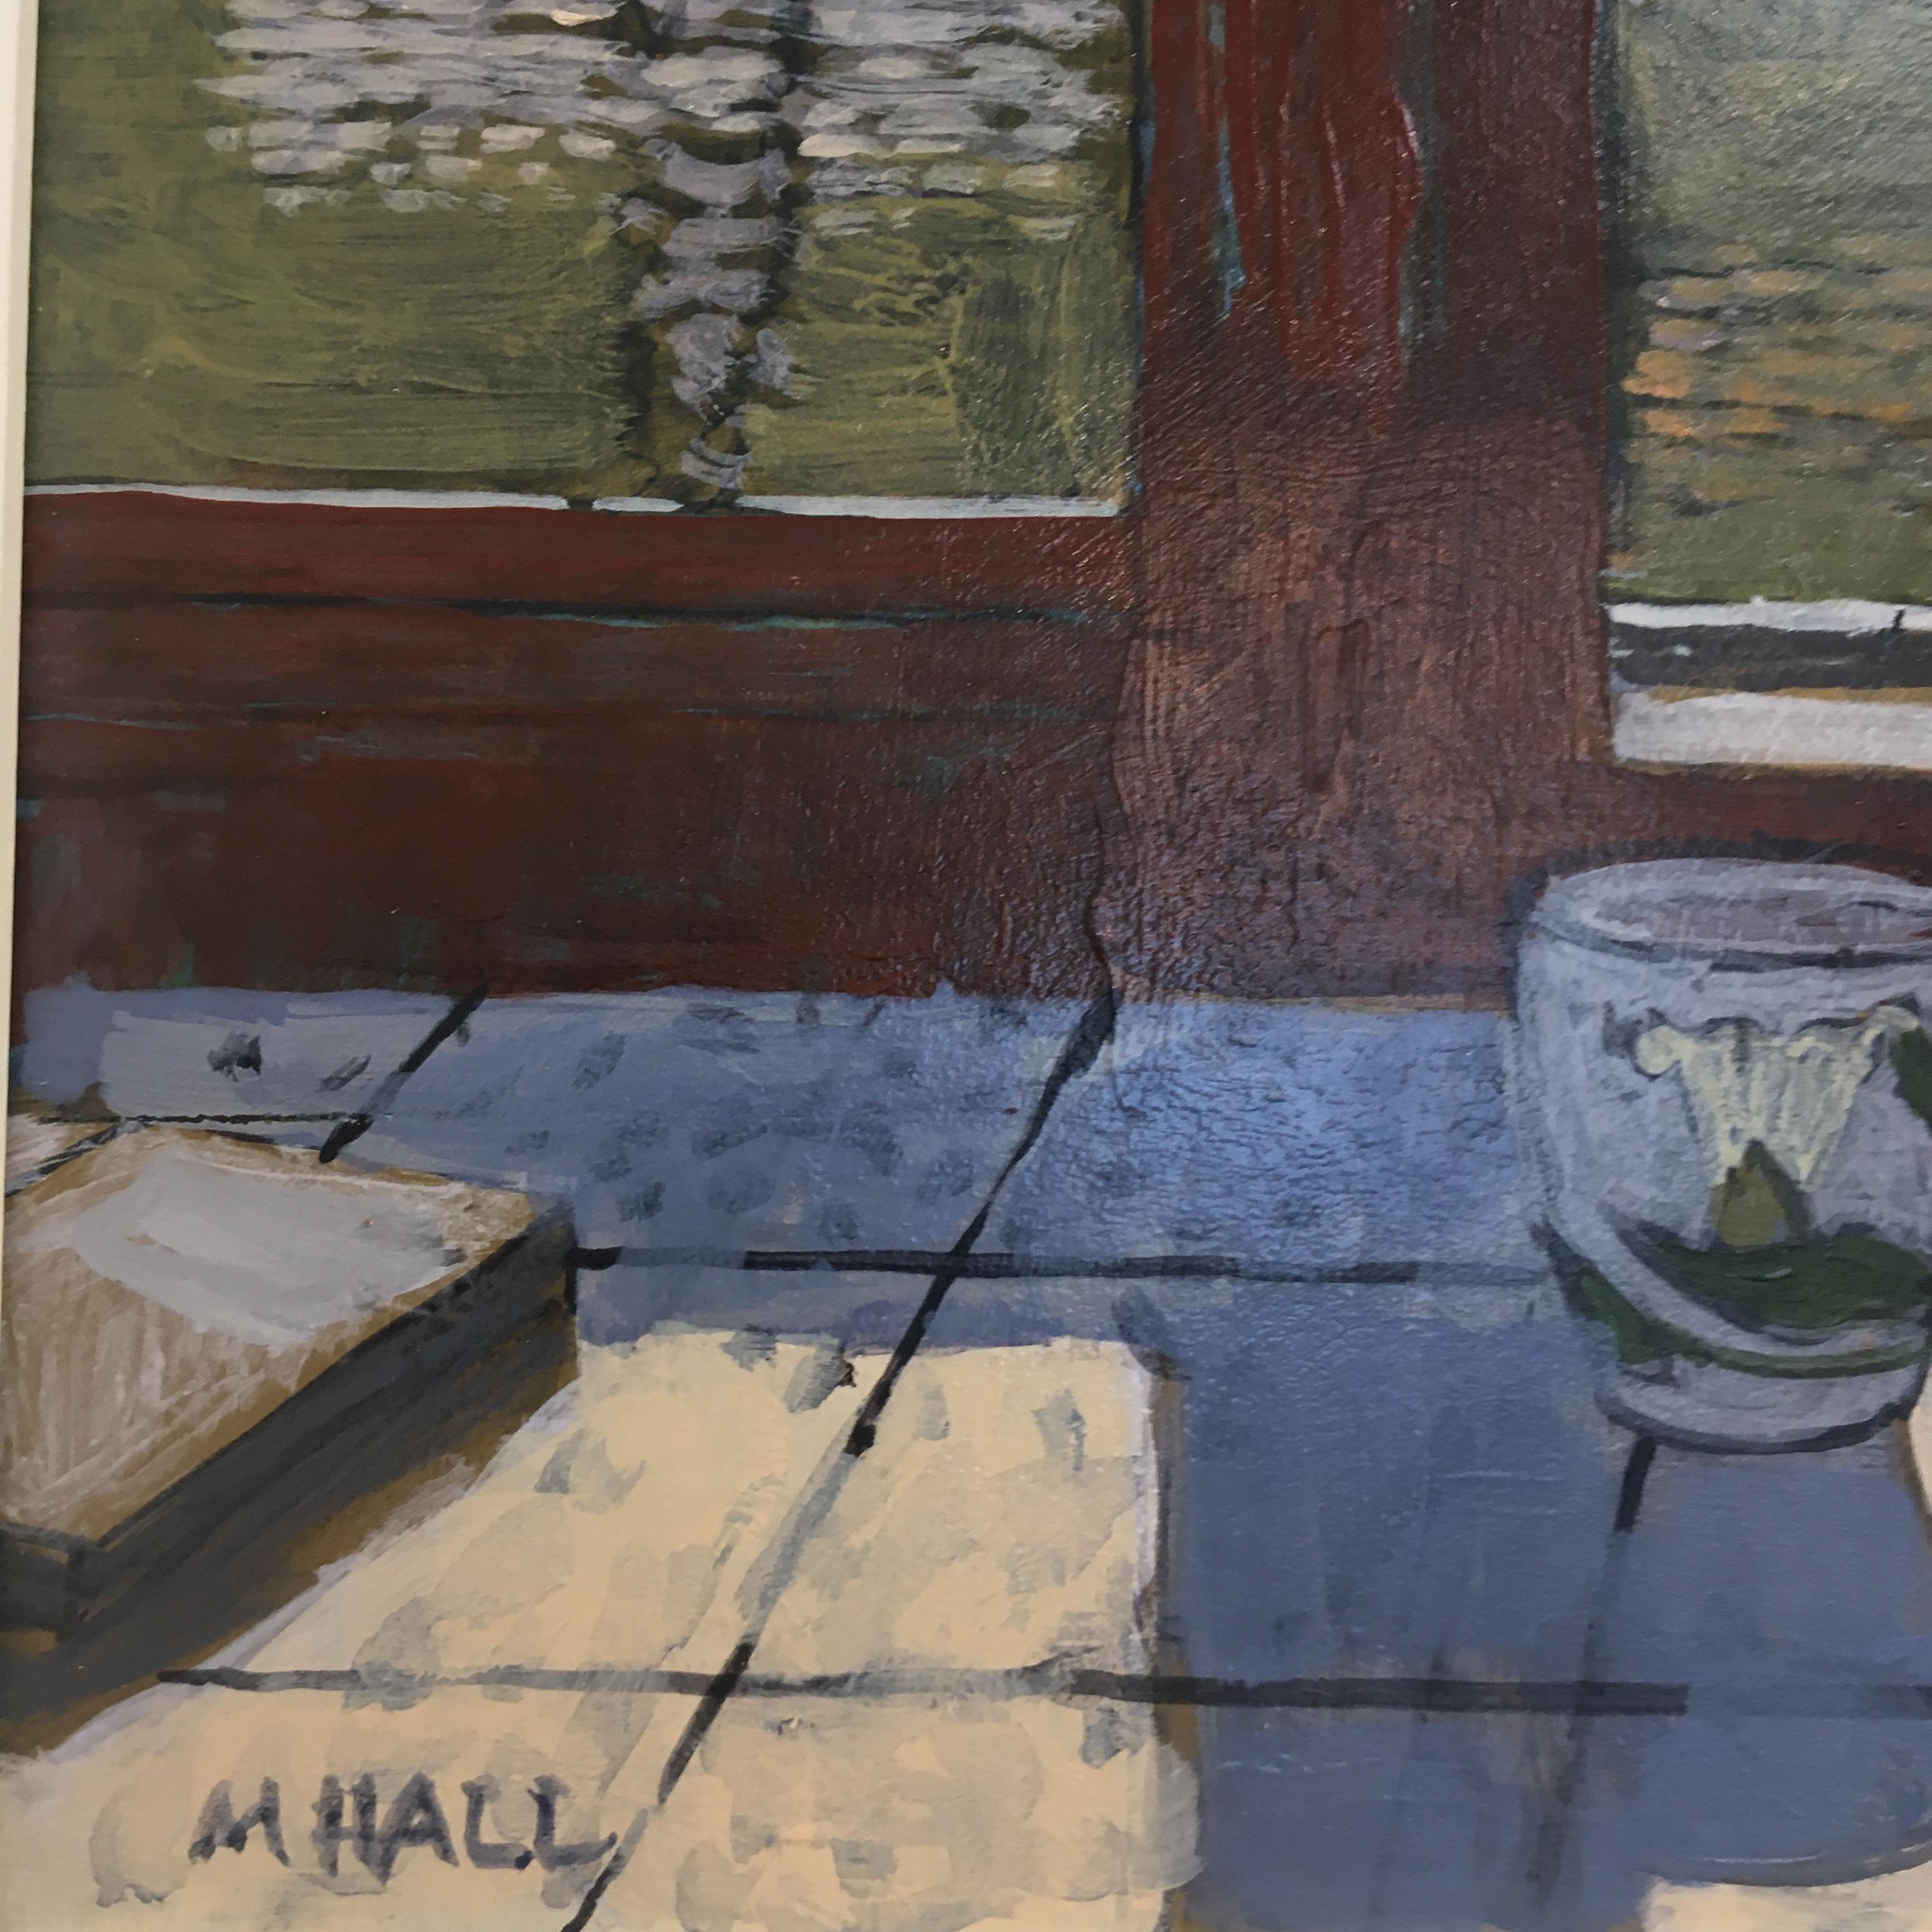 View Across the River Argenton - contemporary window view acrylic painting  - Contemporary Painting by Mike Hall